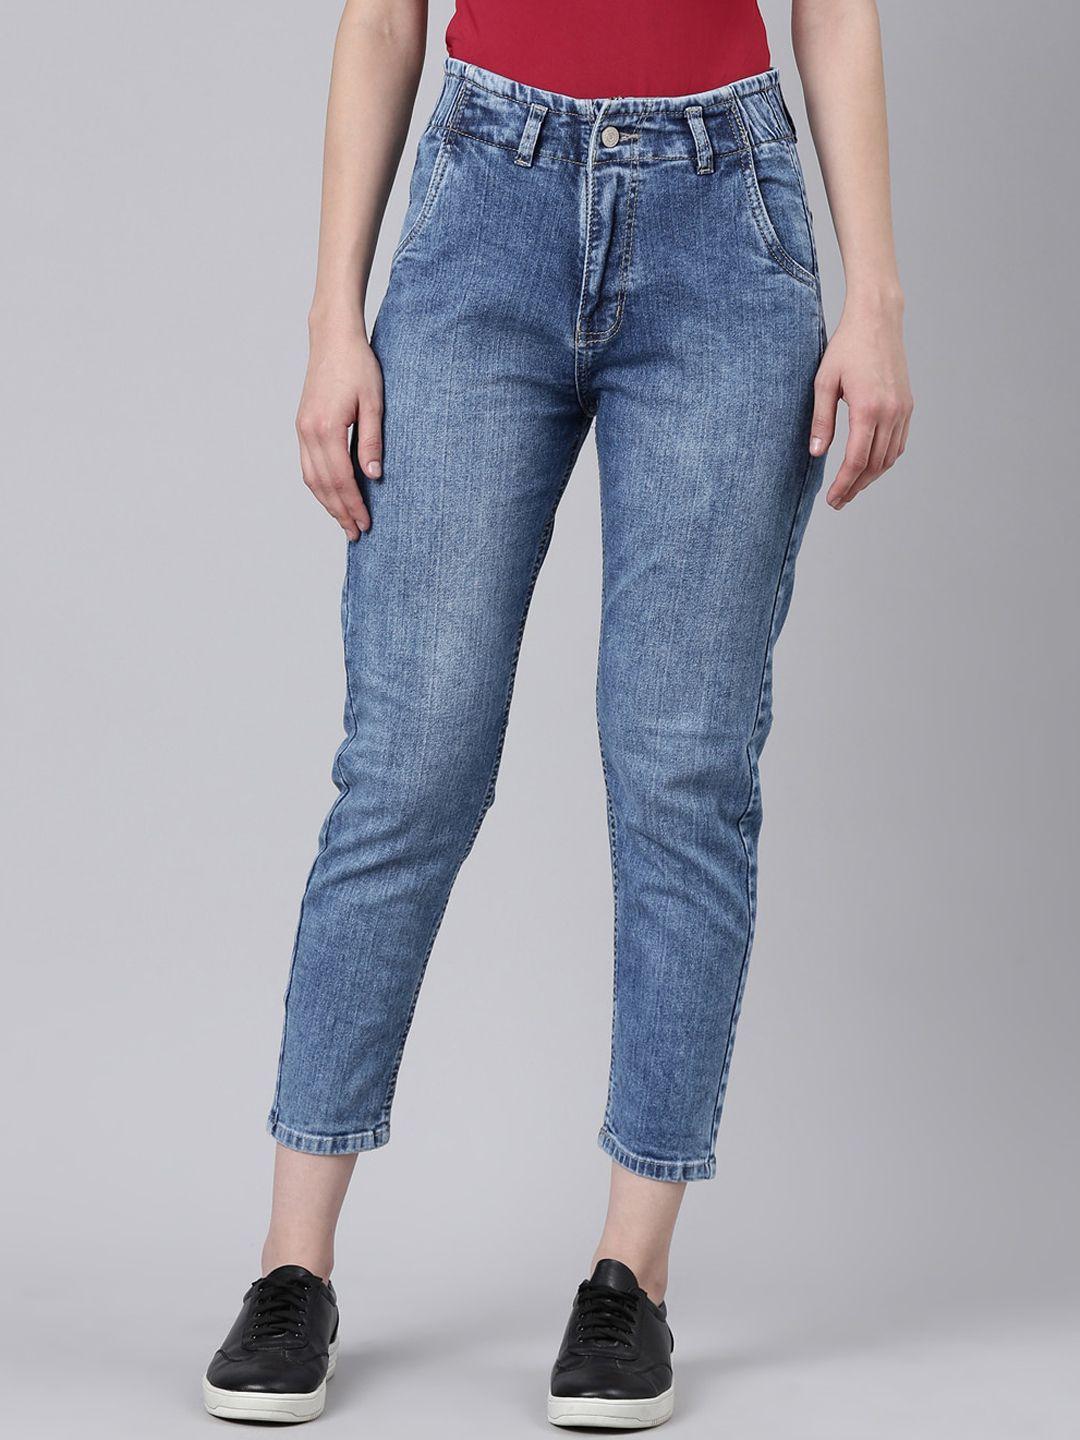 showoff-women-heavy-fade-acid-wash-mom-fit-stretchable-clean-look-jeans